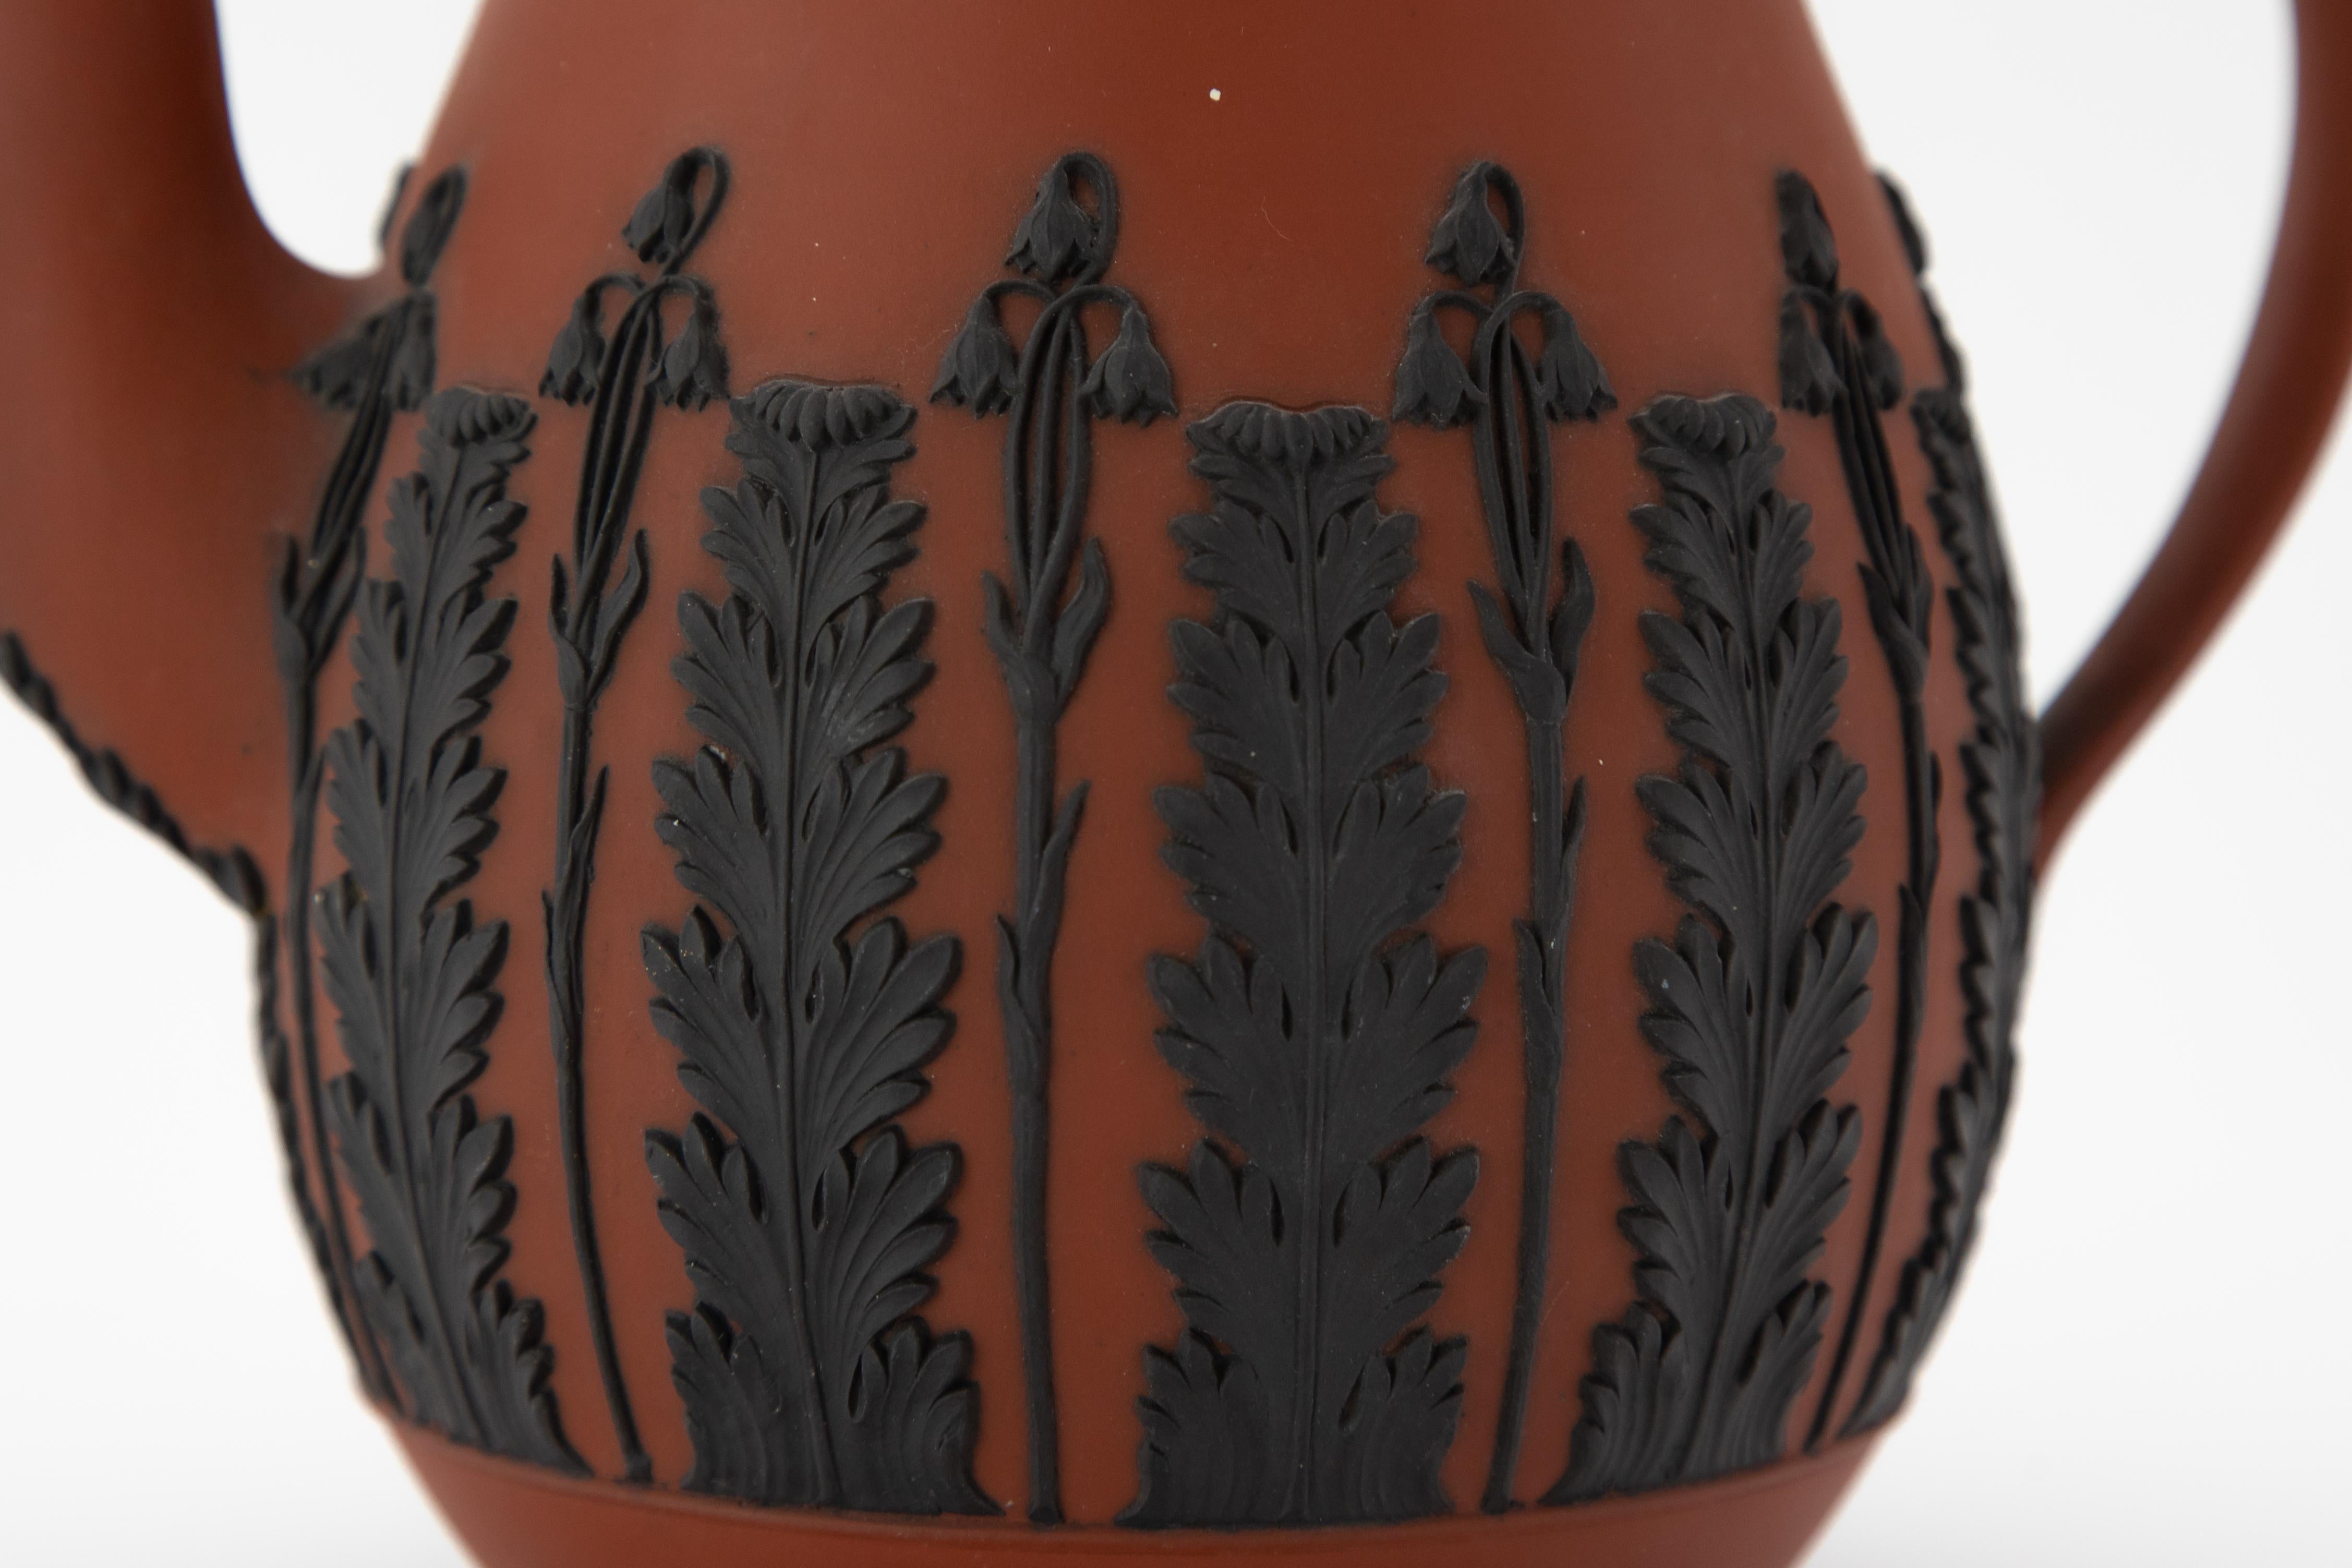 red wedgewood